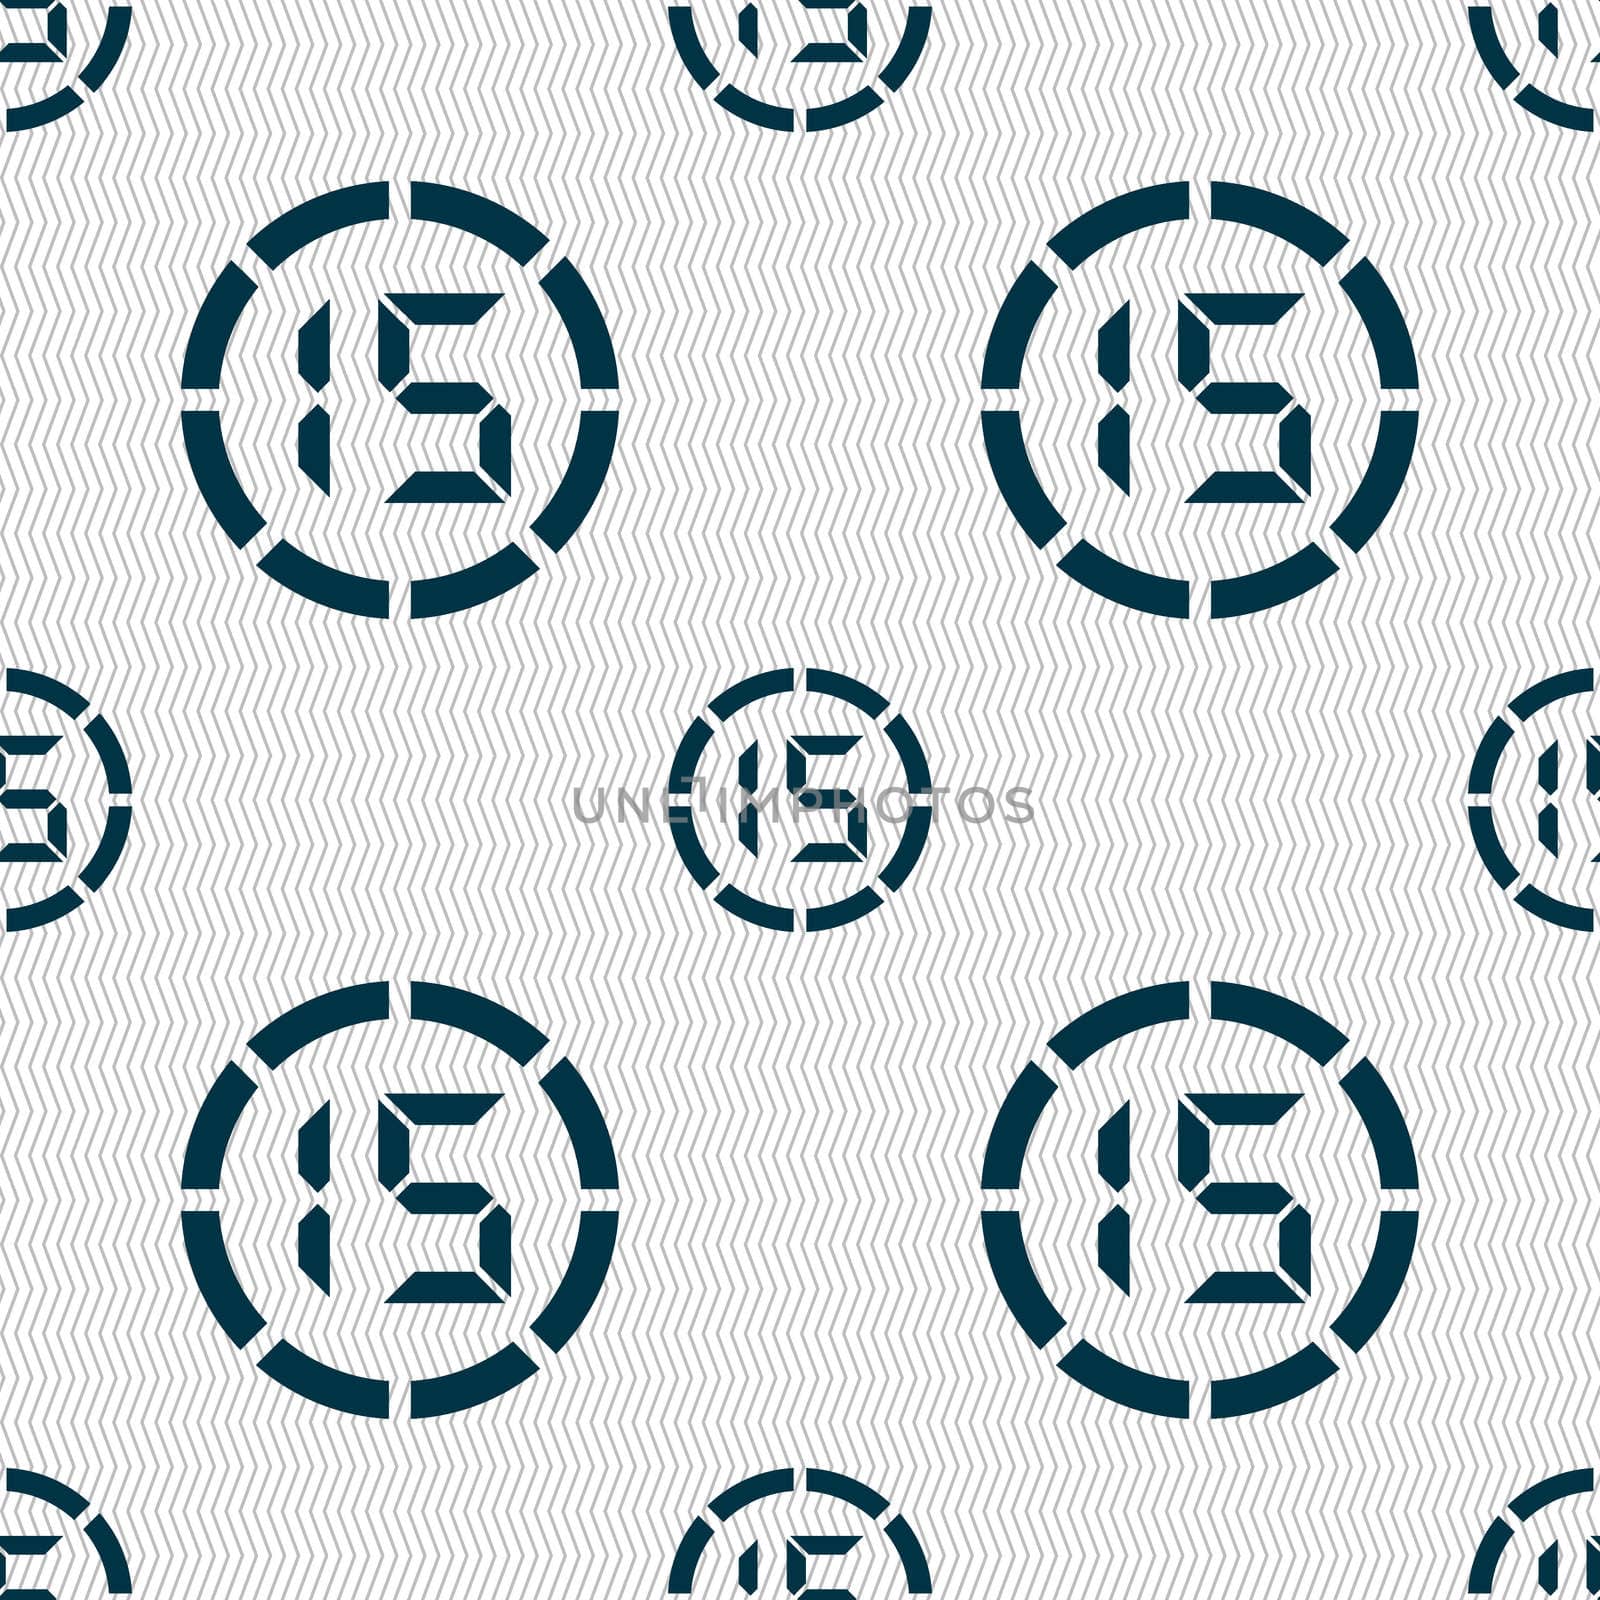 15 second stopwatch icon sign. Seamless abstract background with geometric shapes. illustration